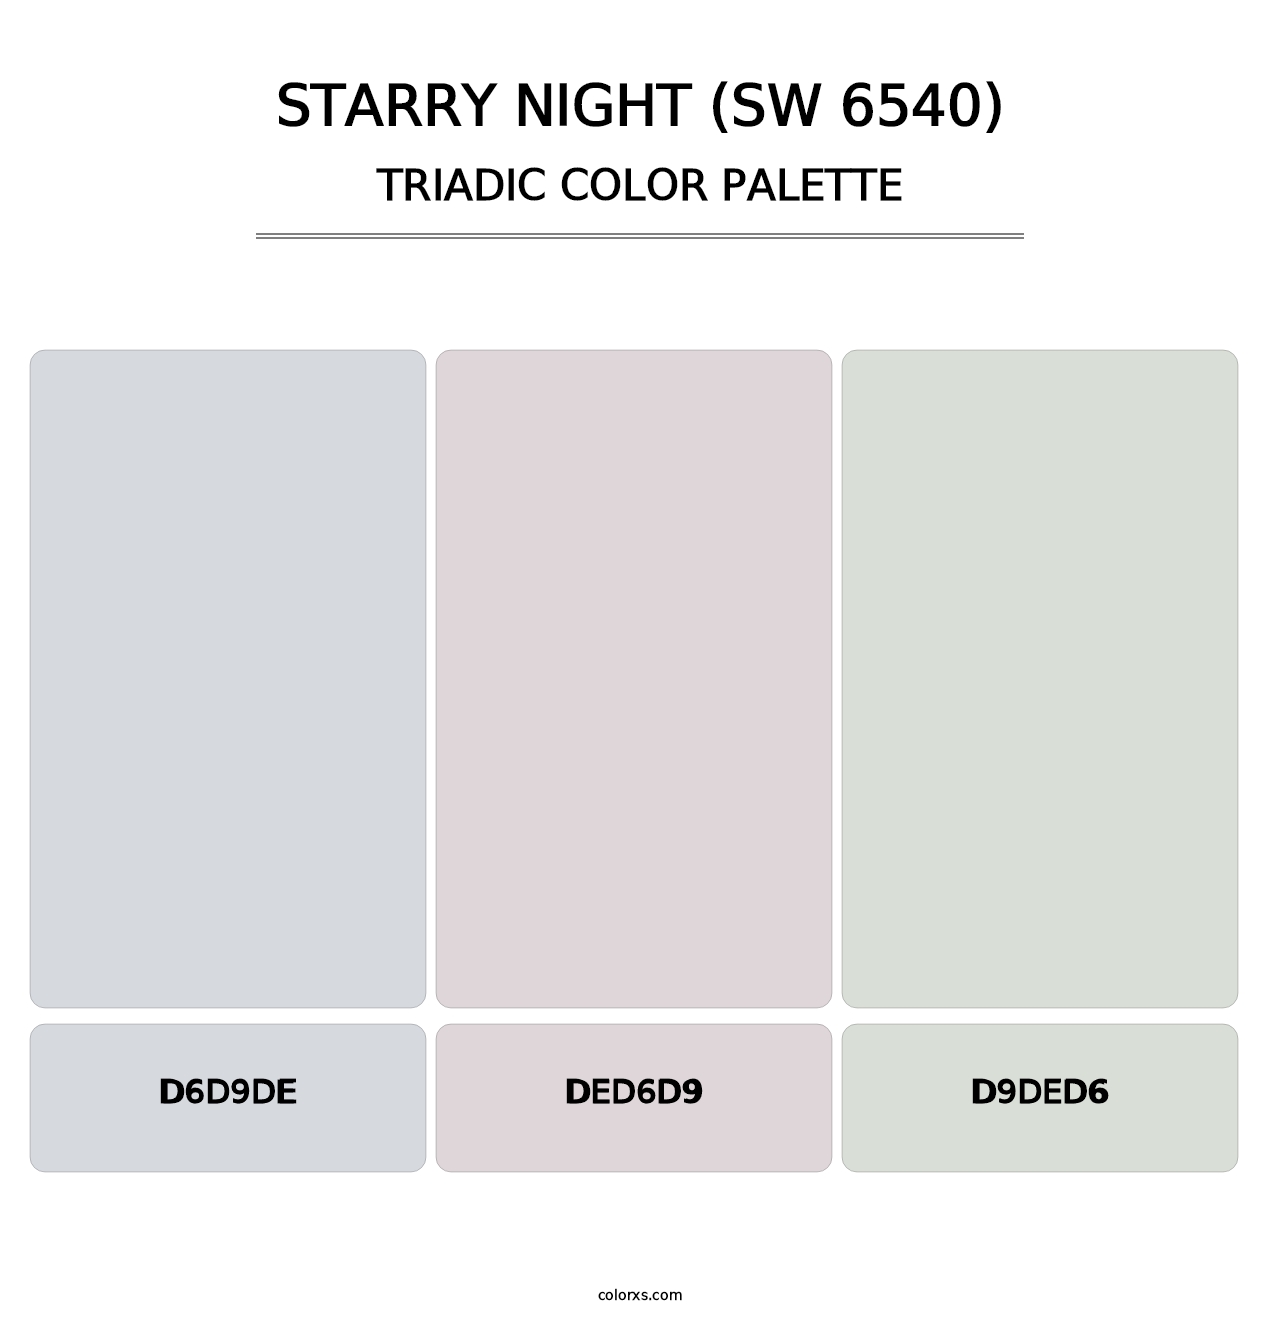 Starry Night (SW 6540) - Triadic Color Palette